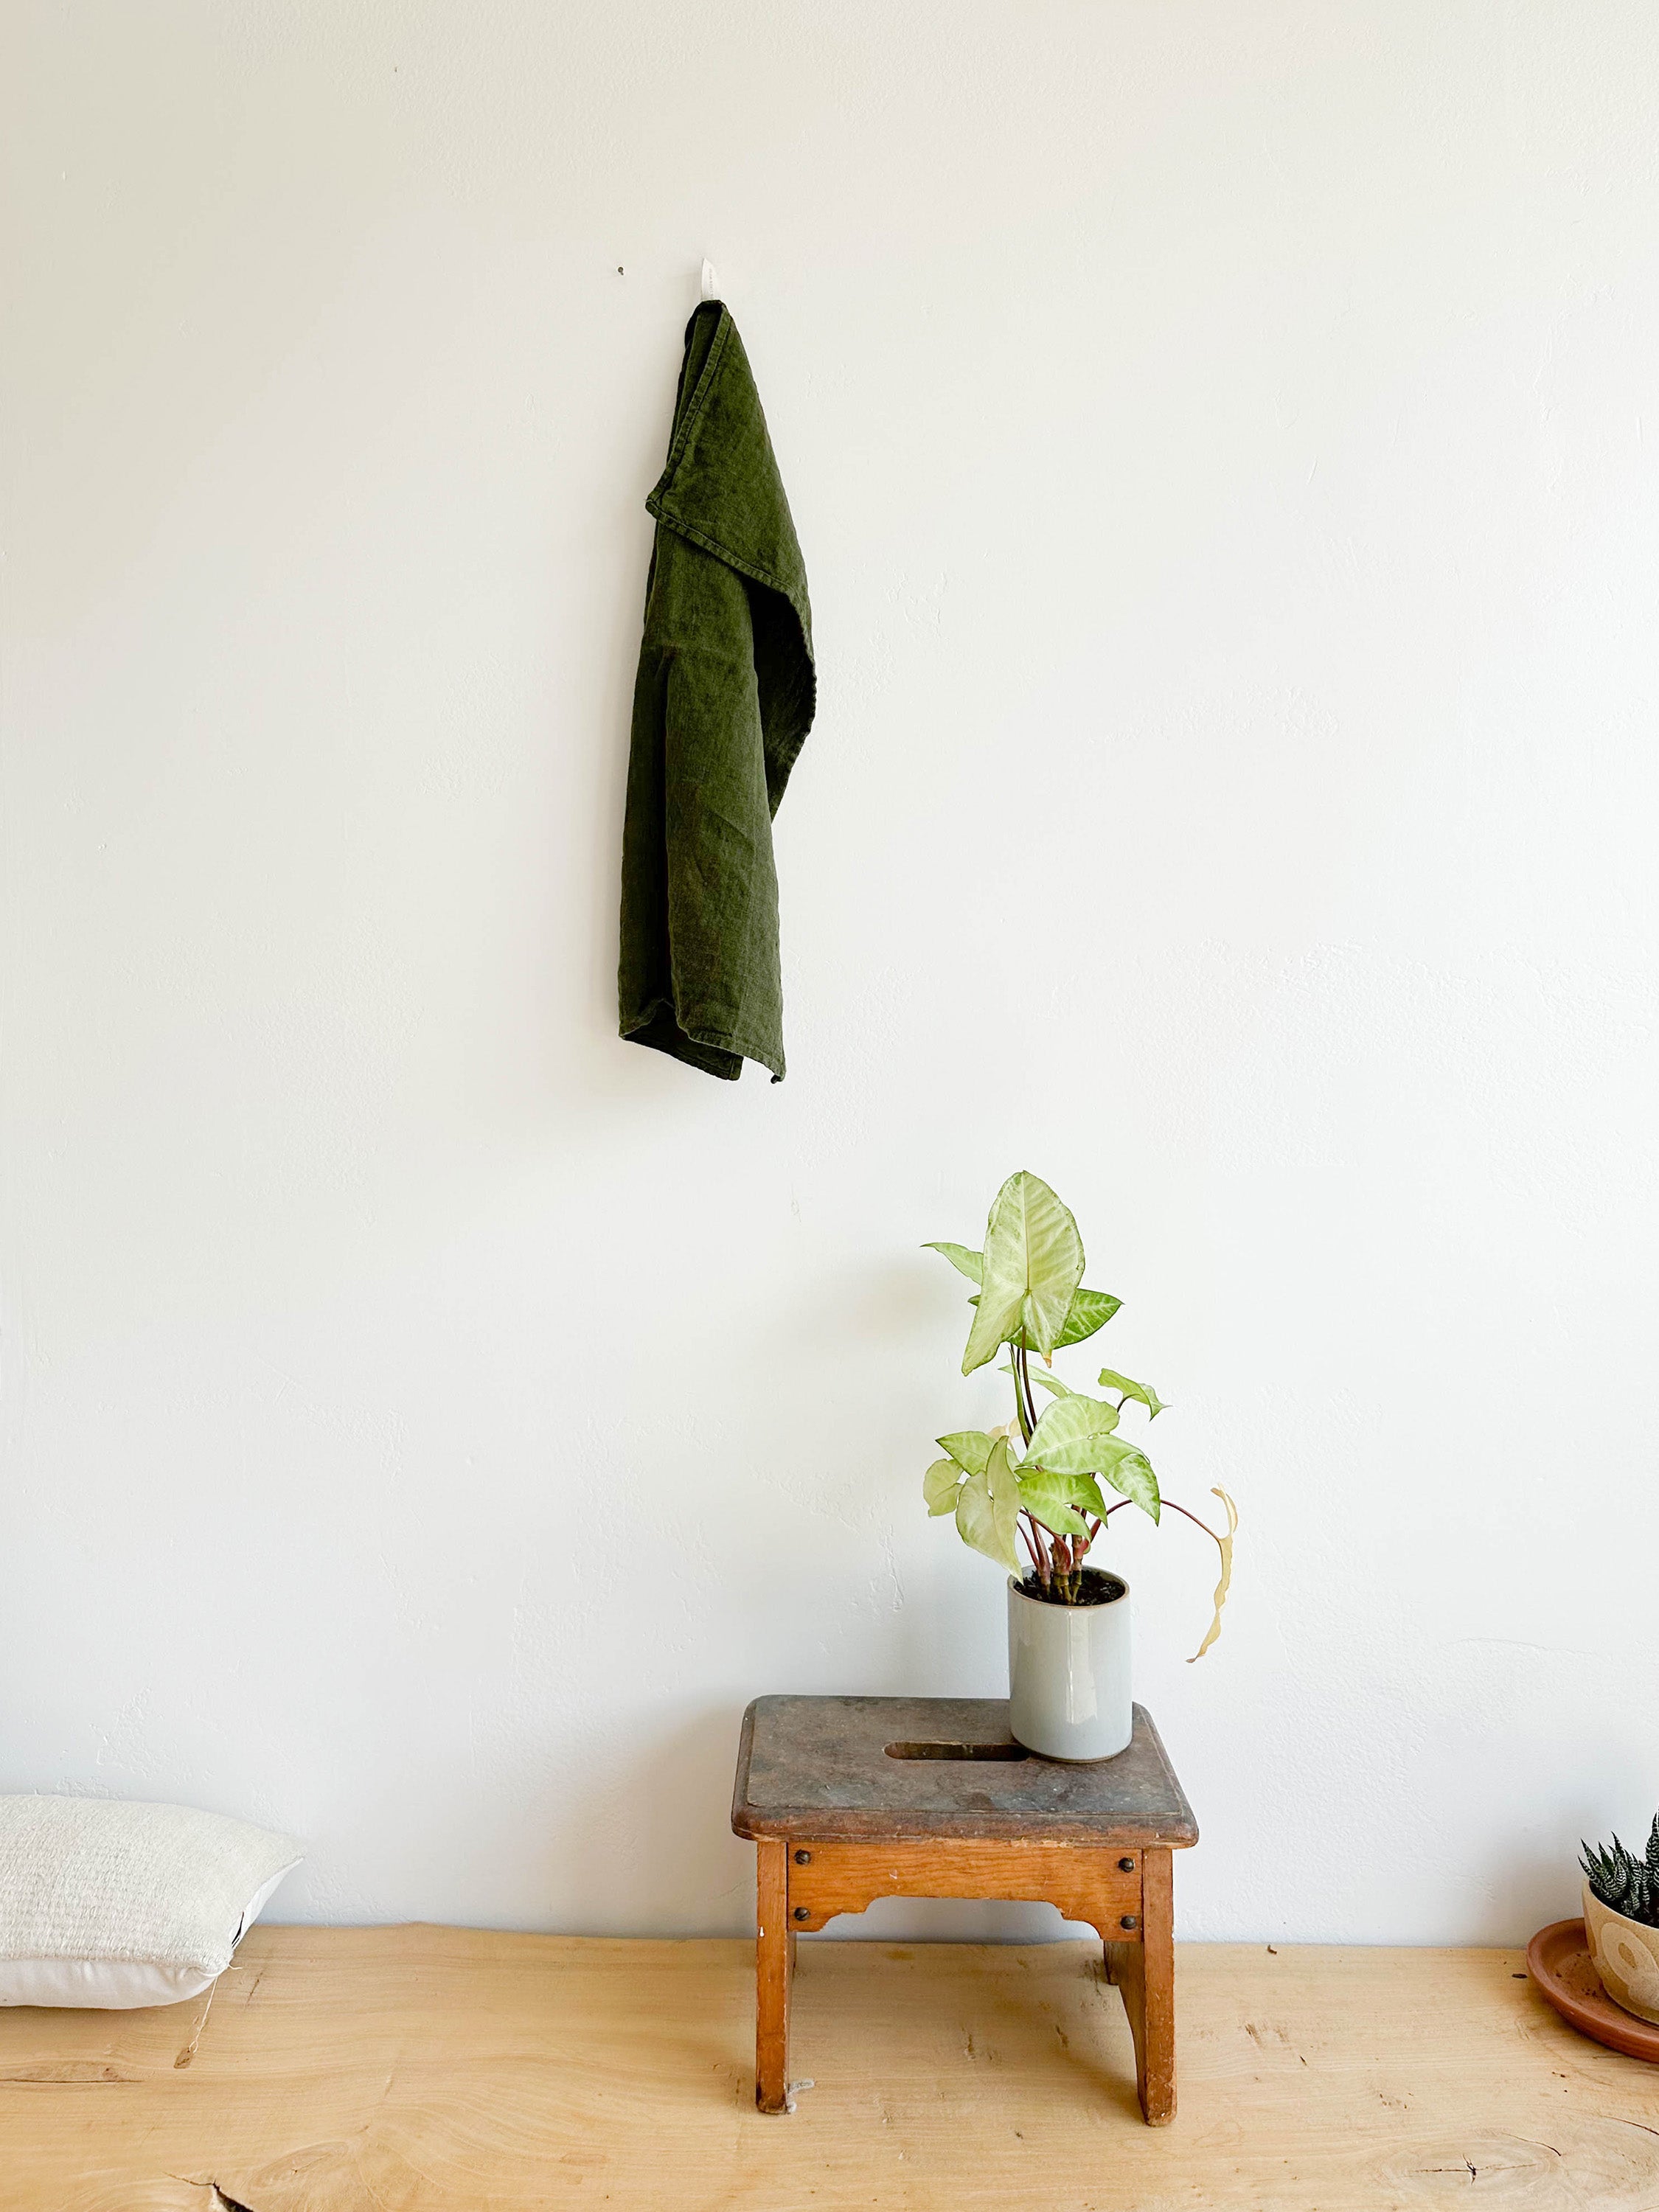 Fog Linen Kitchen Towel shown in green hanging from hook | lifestyle